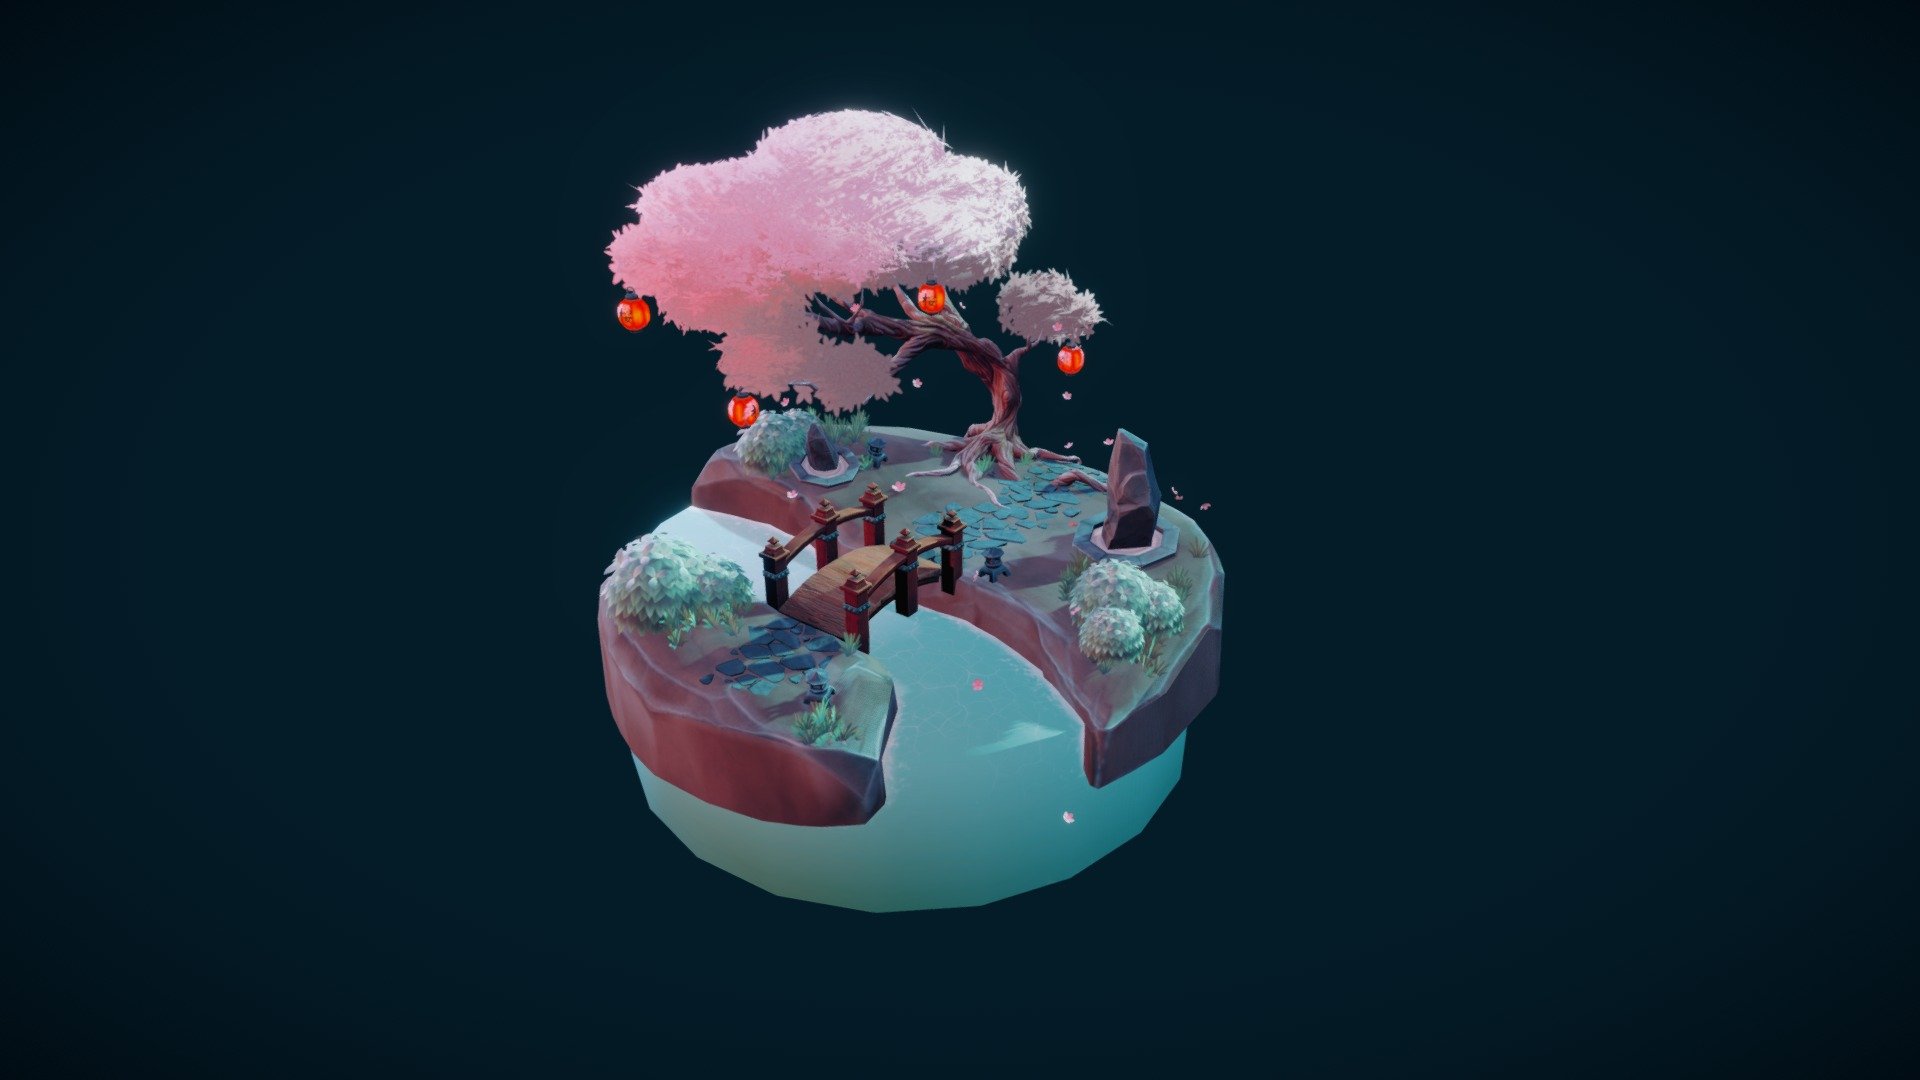 Made this little scene in Unity! You can see the real thing on my ArtStation c:
https://www.artstation.com/artwork/YK4gKV - Sakura Diorama - 3D model by JuliaLundman 3d model